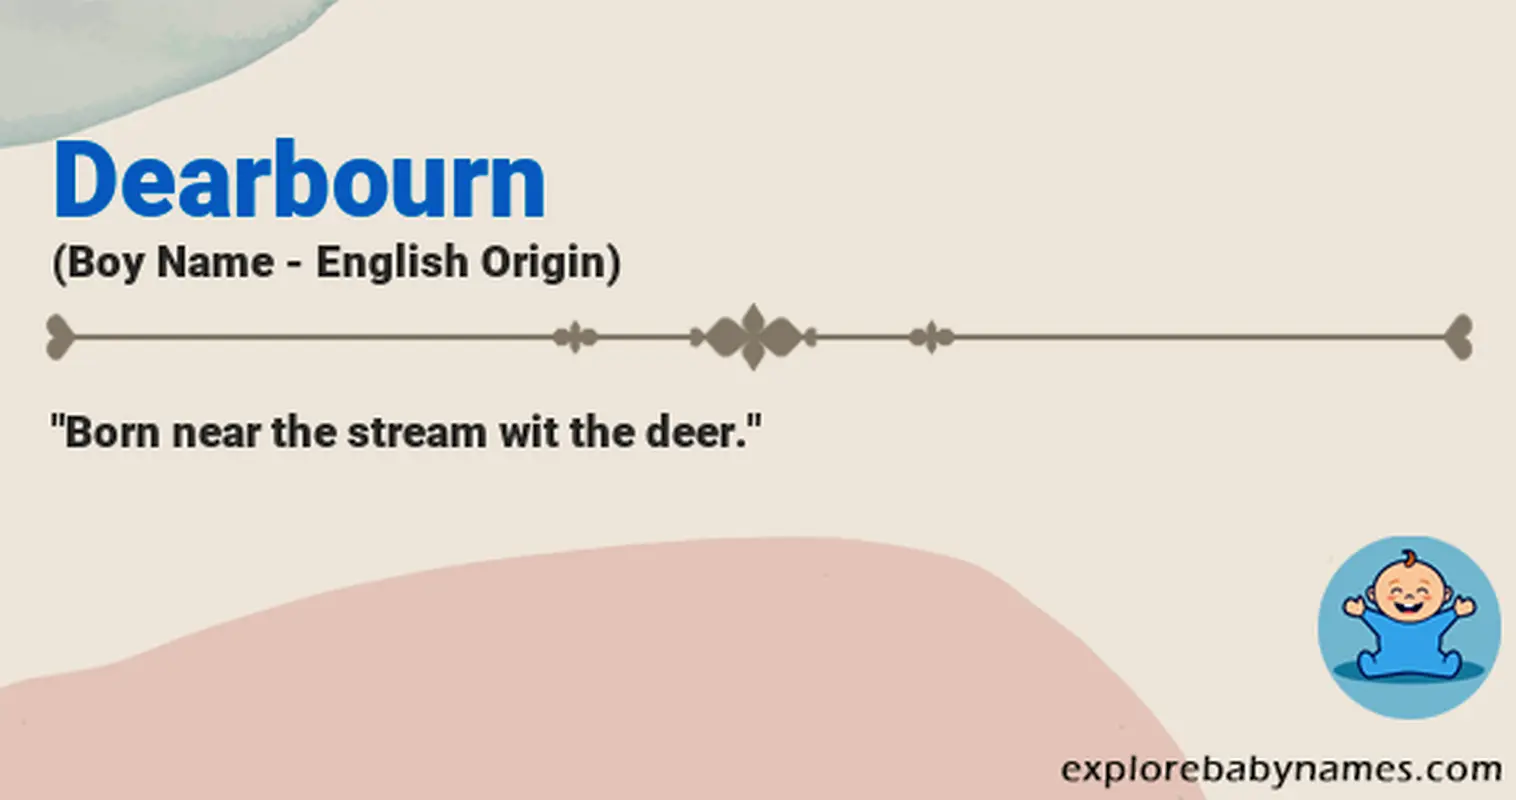 Meaning of Dearbourn